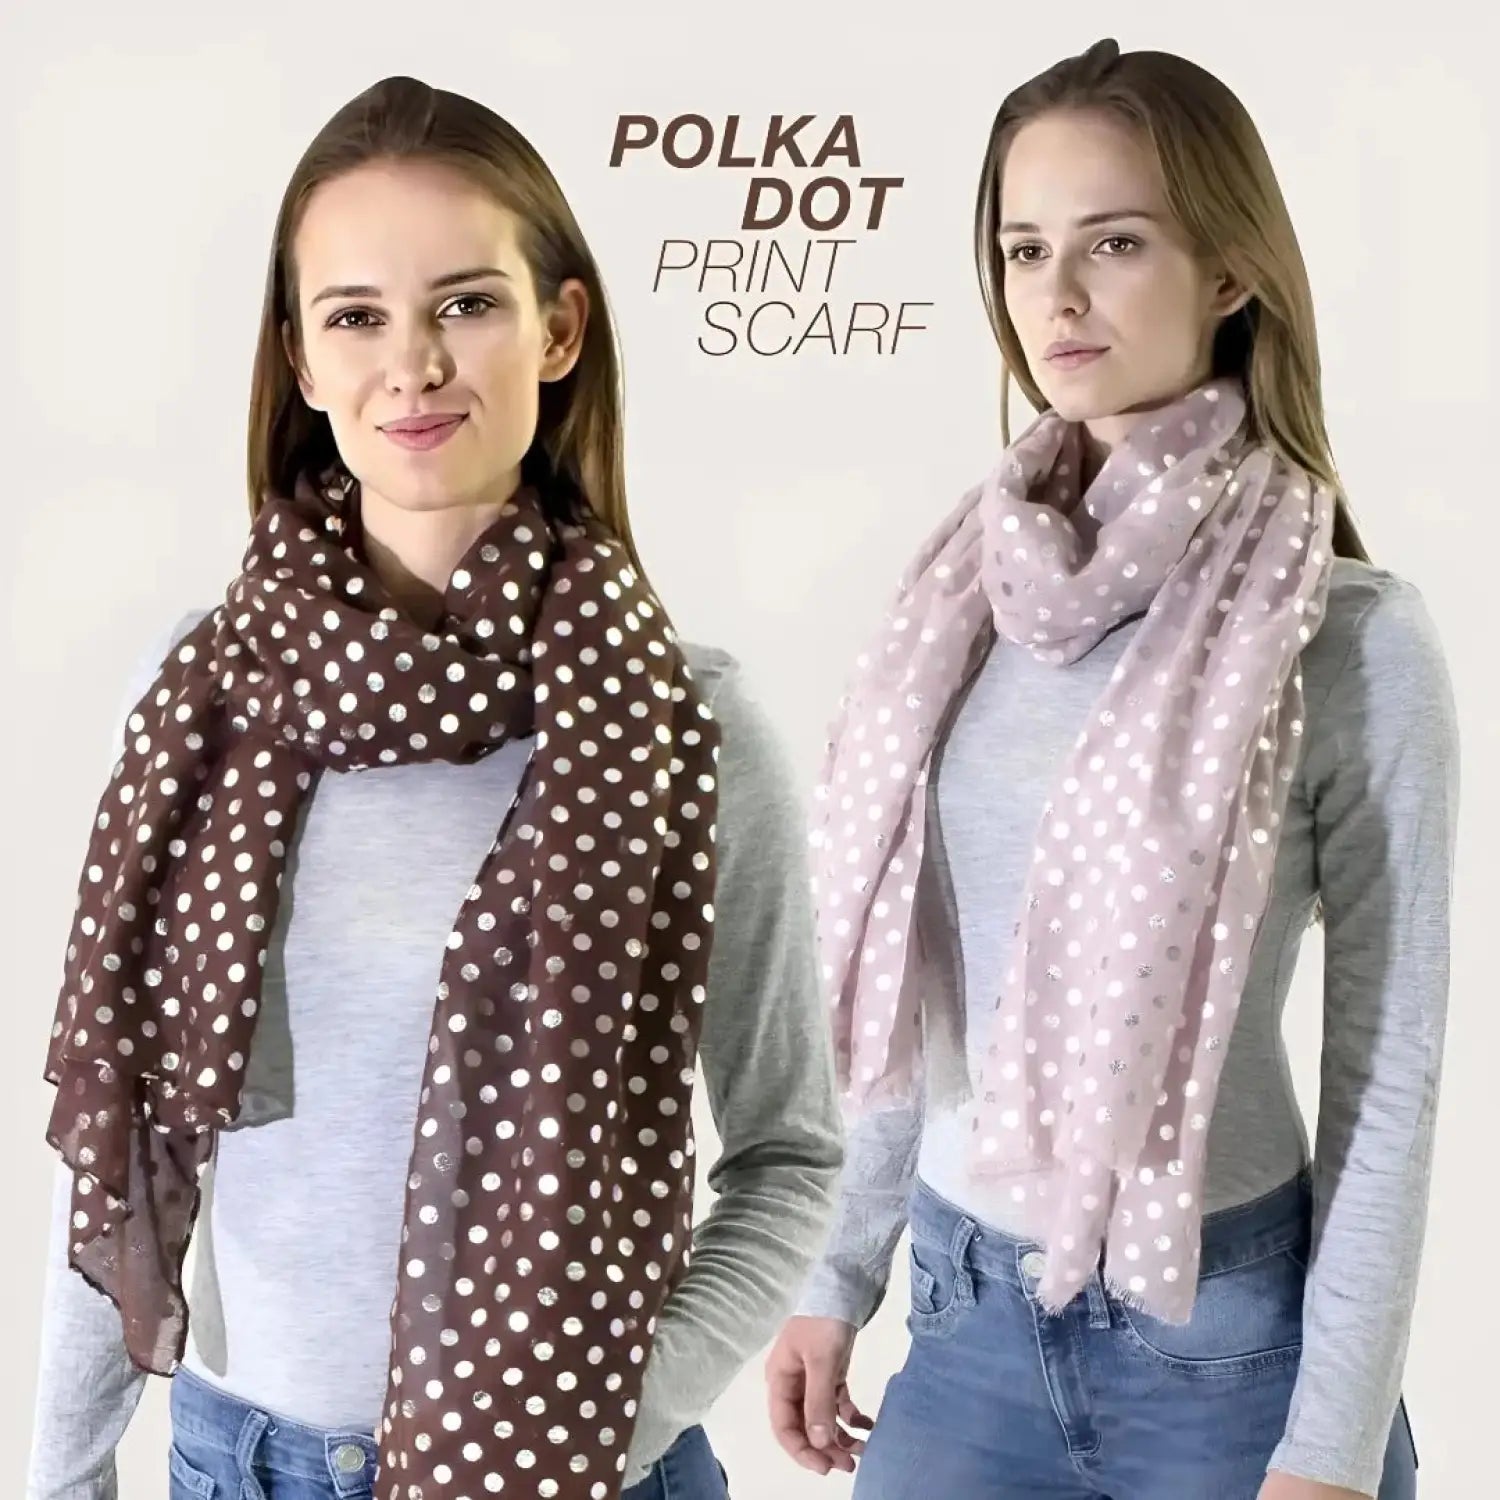 Two women wearing polka dot scarves and jeans standing next to each other.